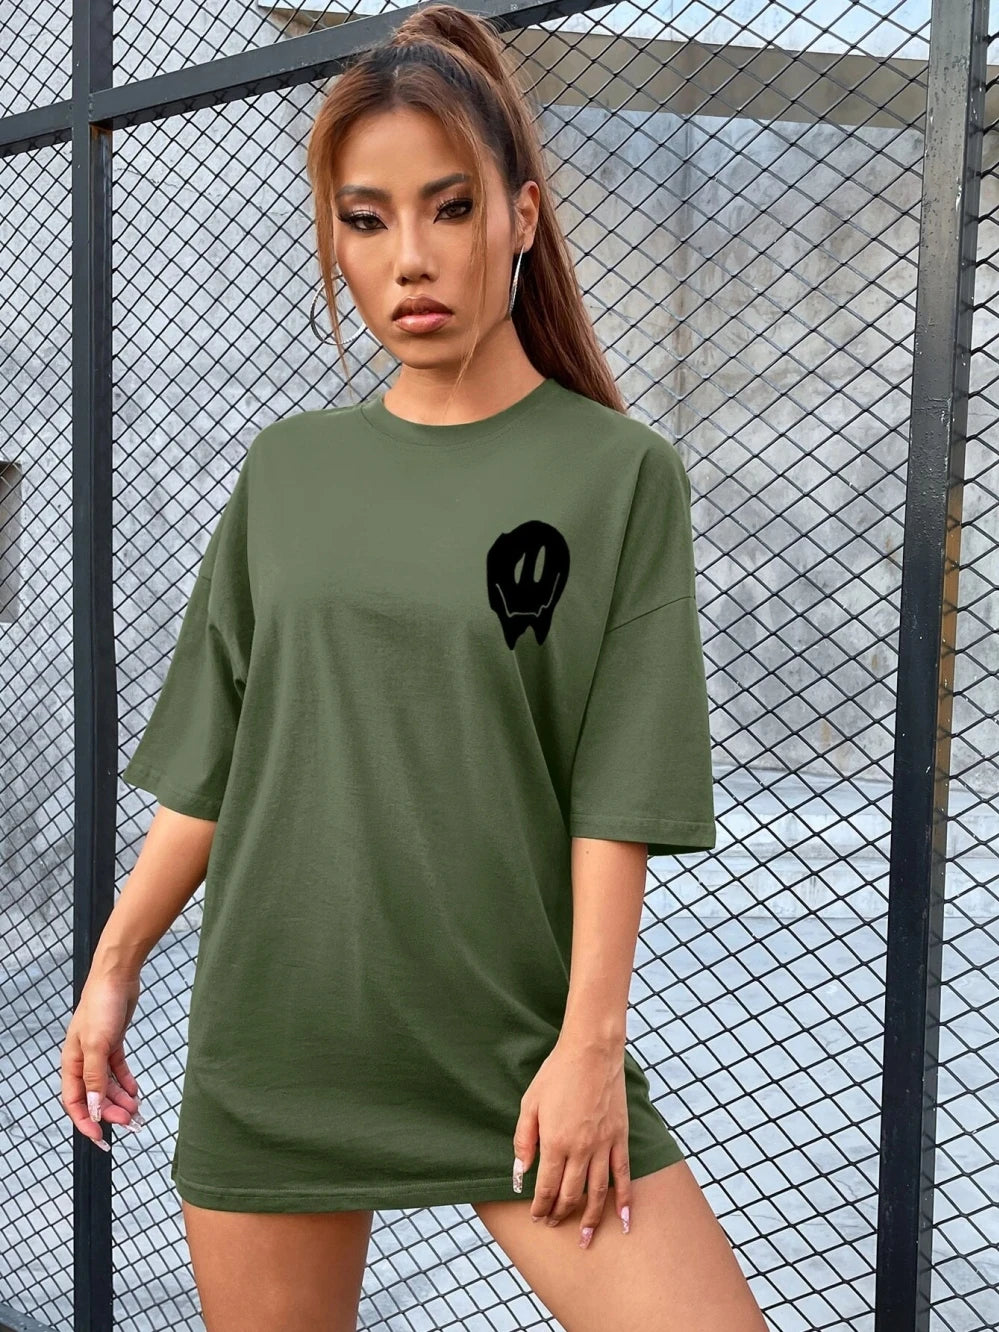 FZ Women's Don't Trip Over What's Behind You Fashion Street Oversized Tee - FZwear